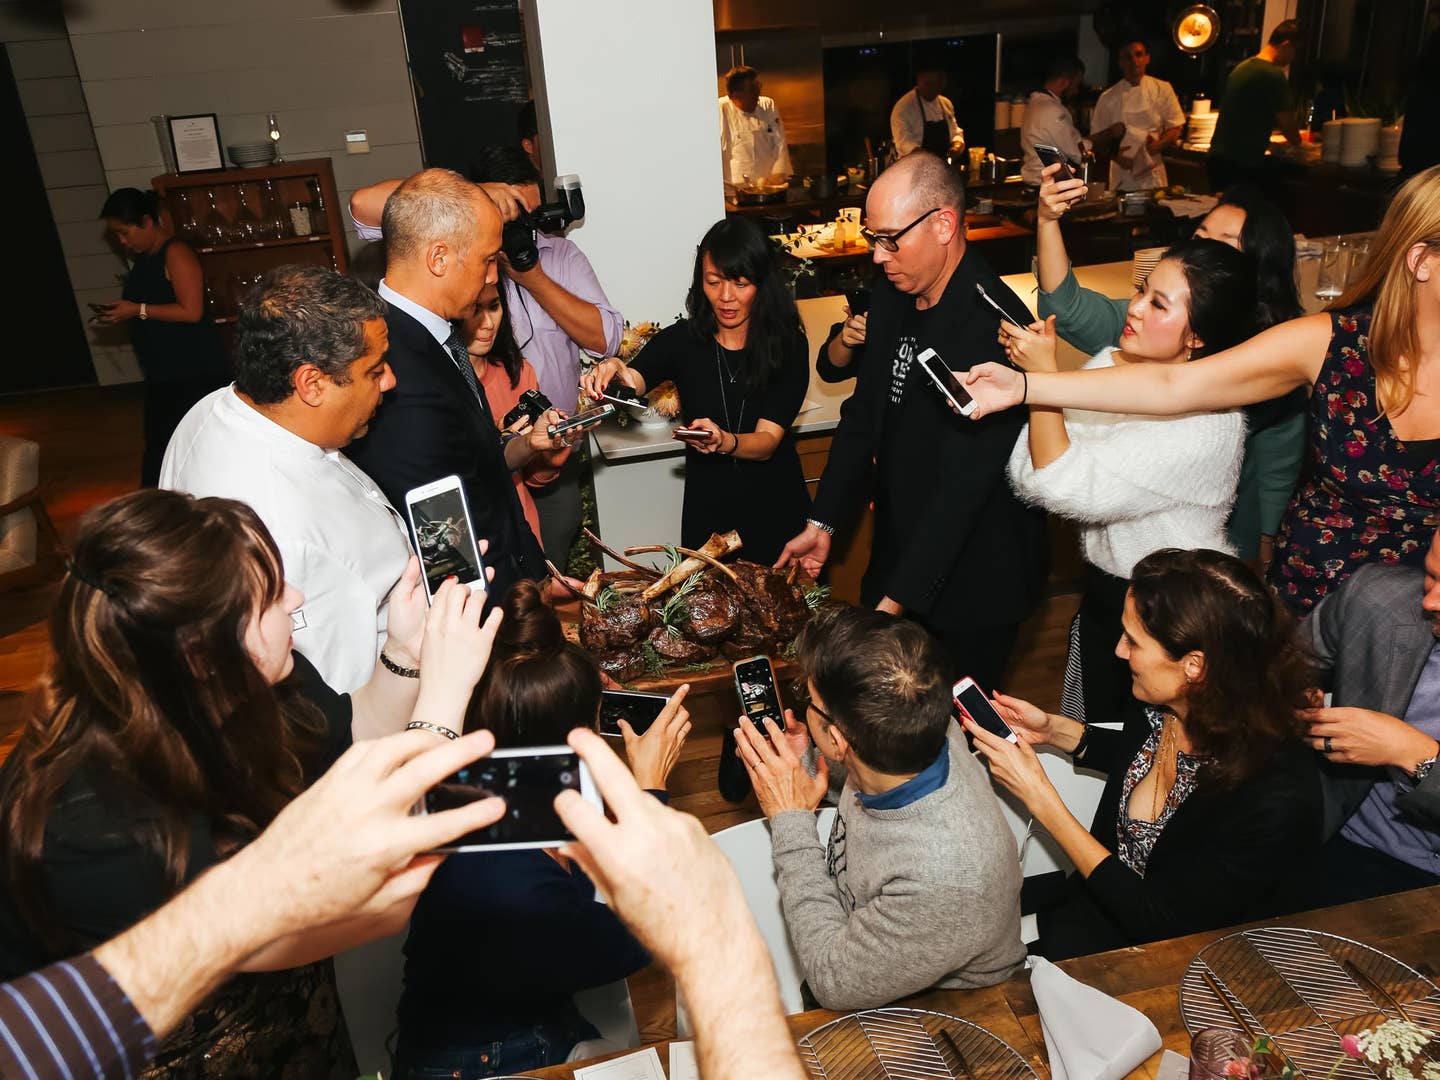 Scenes From Our Saveur Supper With Chef Michael Mina and JW Marriott